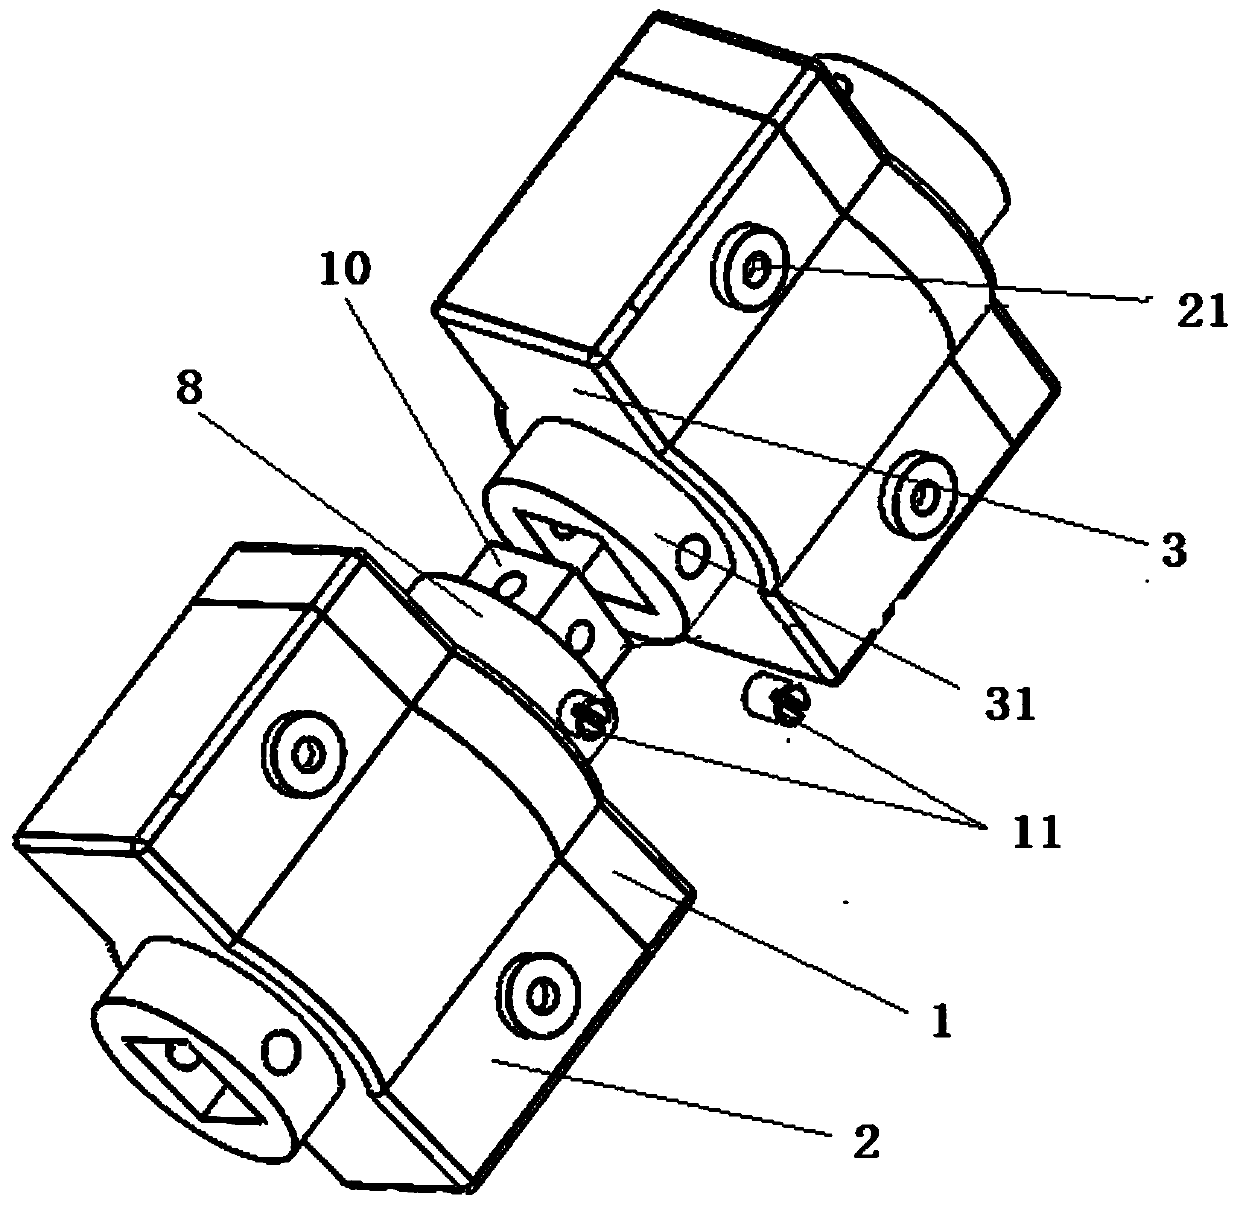 Multi-faceted cascadable servos with center-out axis for position feedback